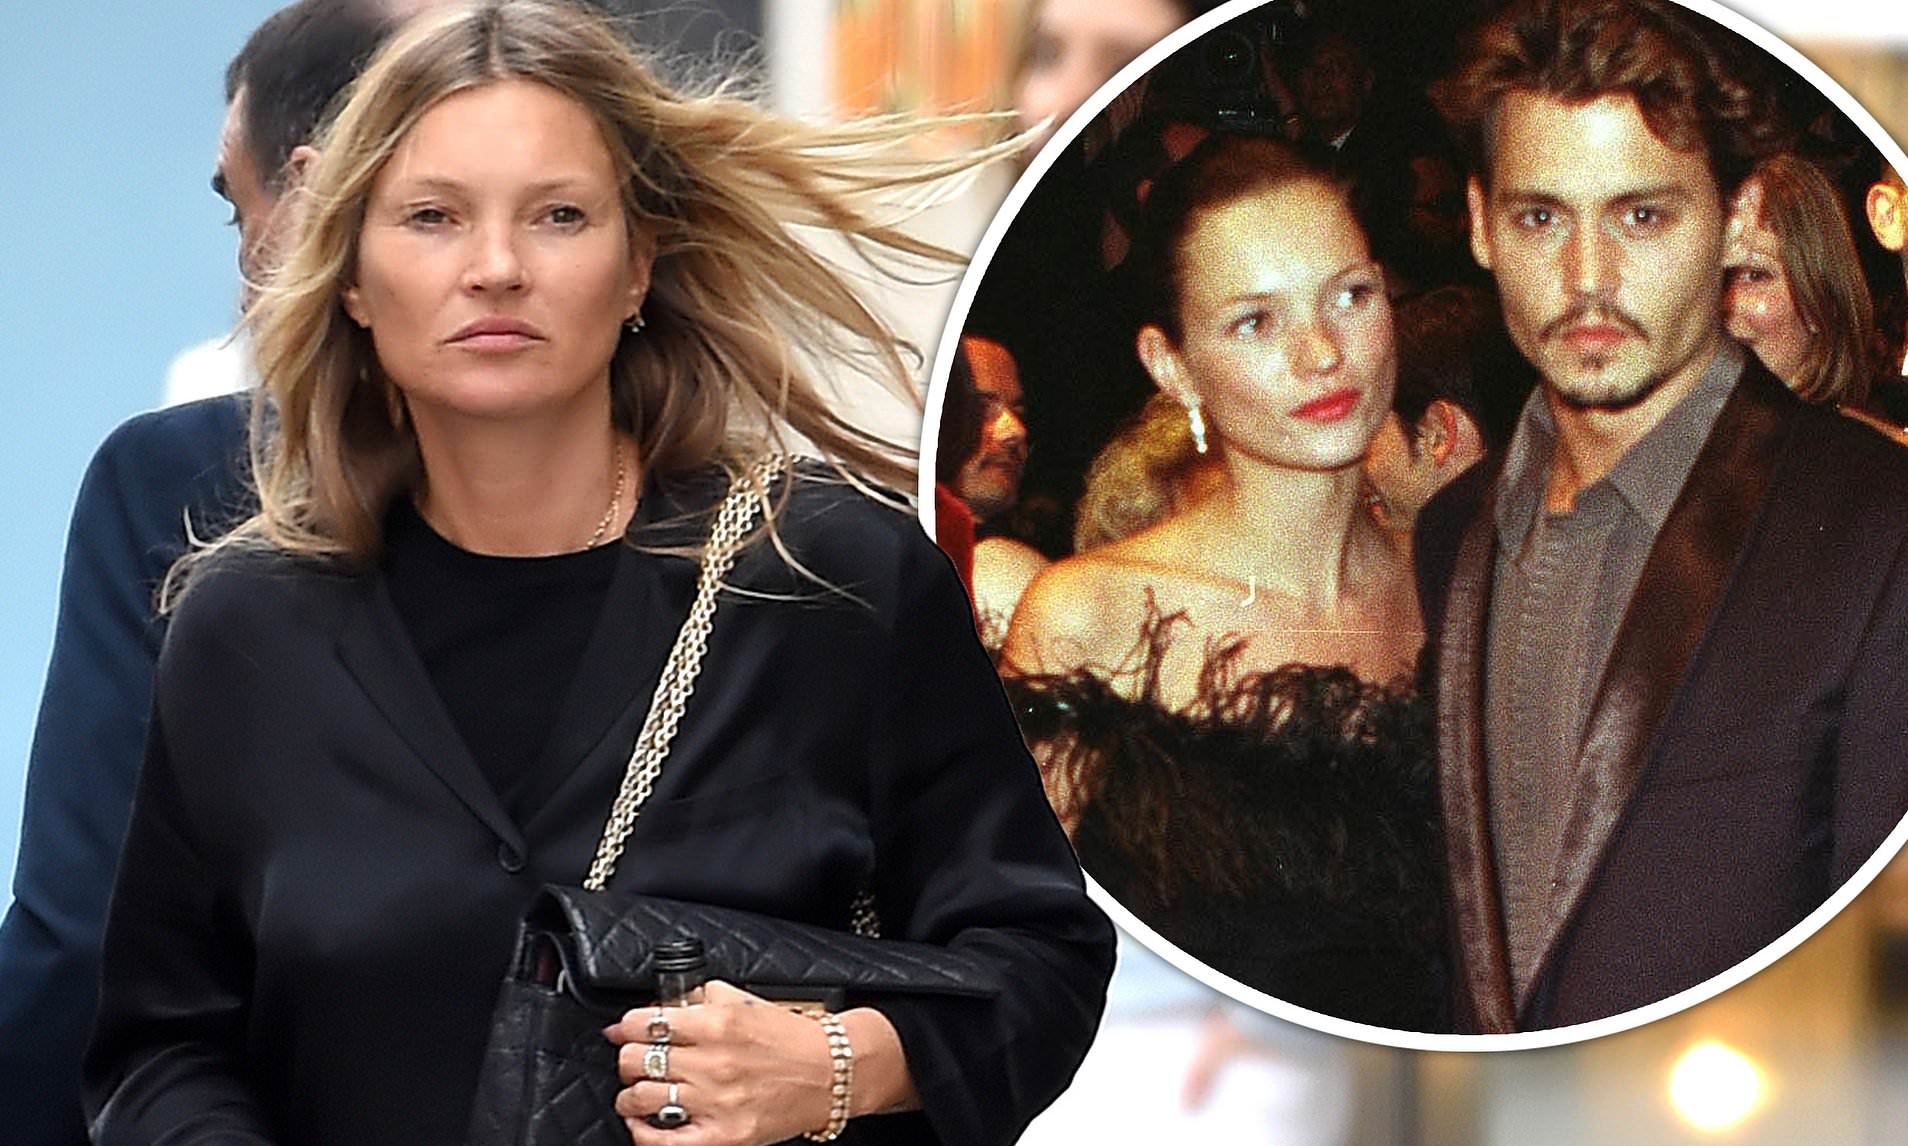 Why did Johnny Depp and Kate Moss actually break up?